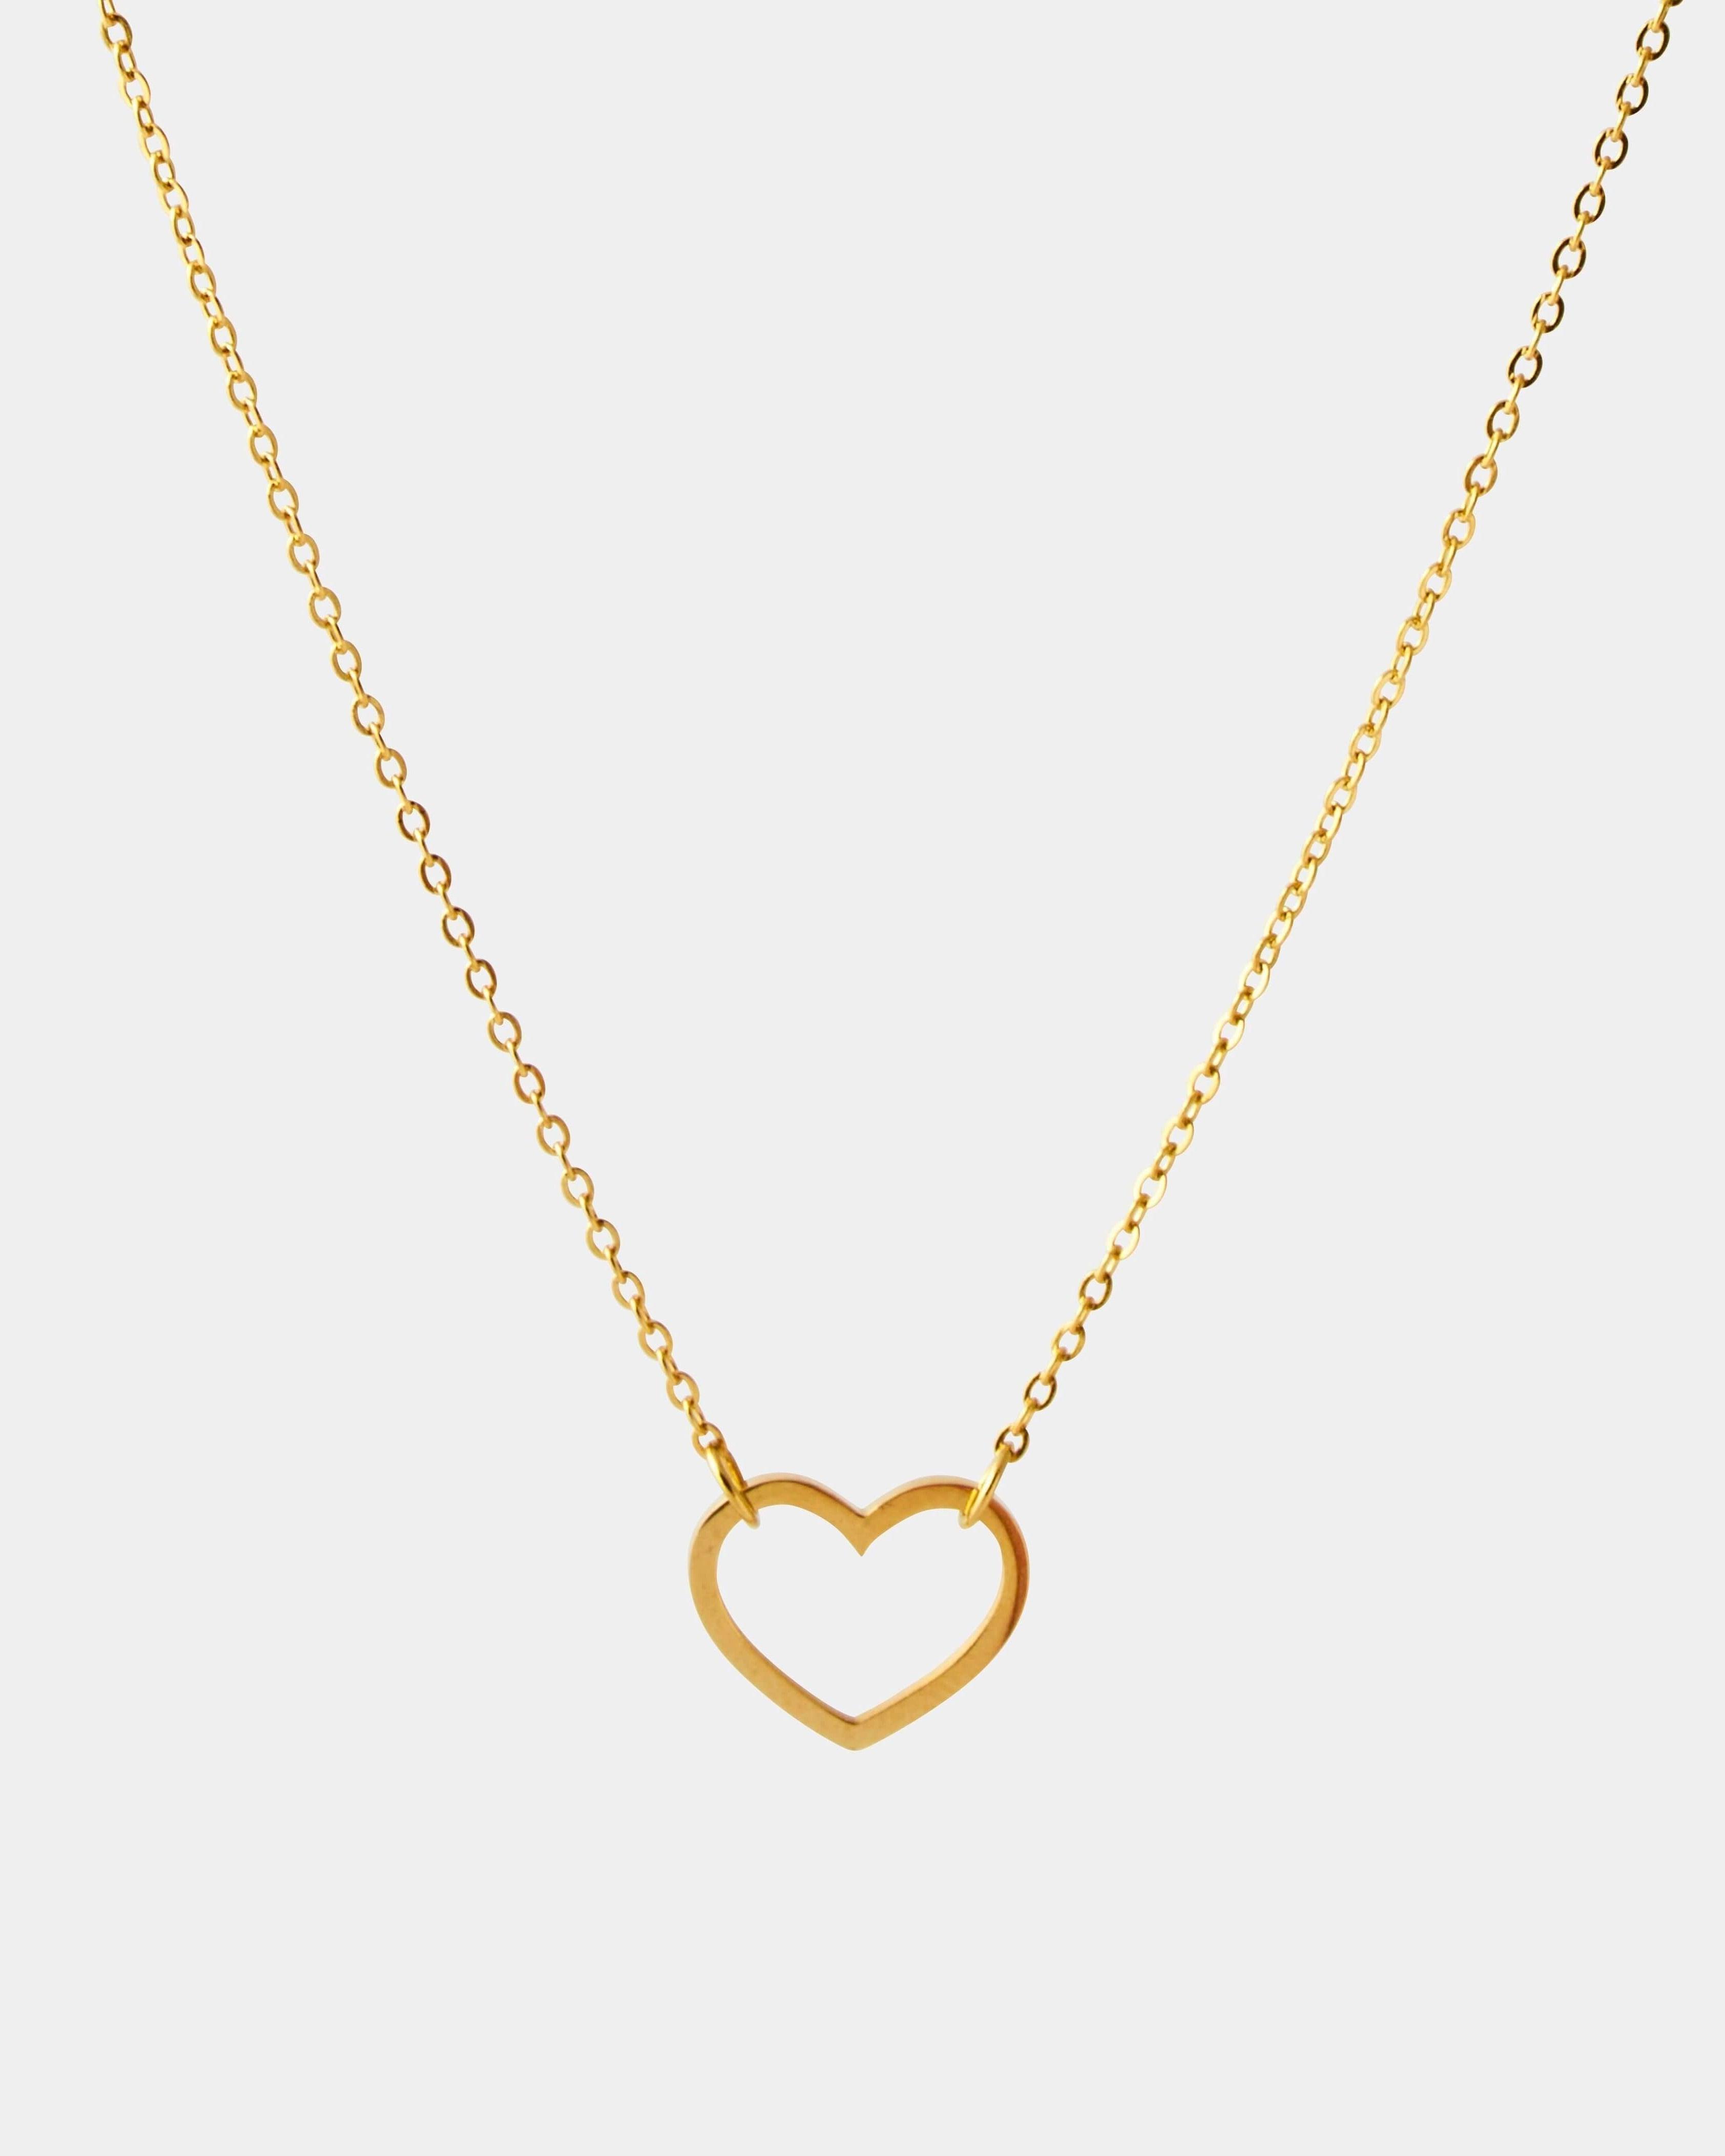 SIMPLE HEART NECKLACE - LIMELY